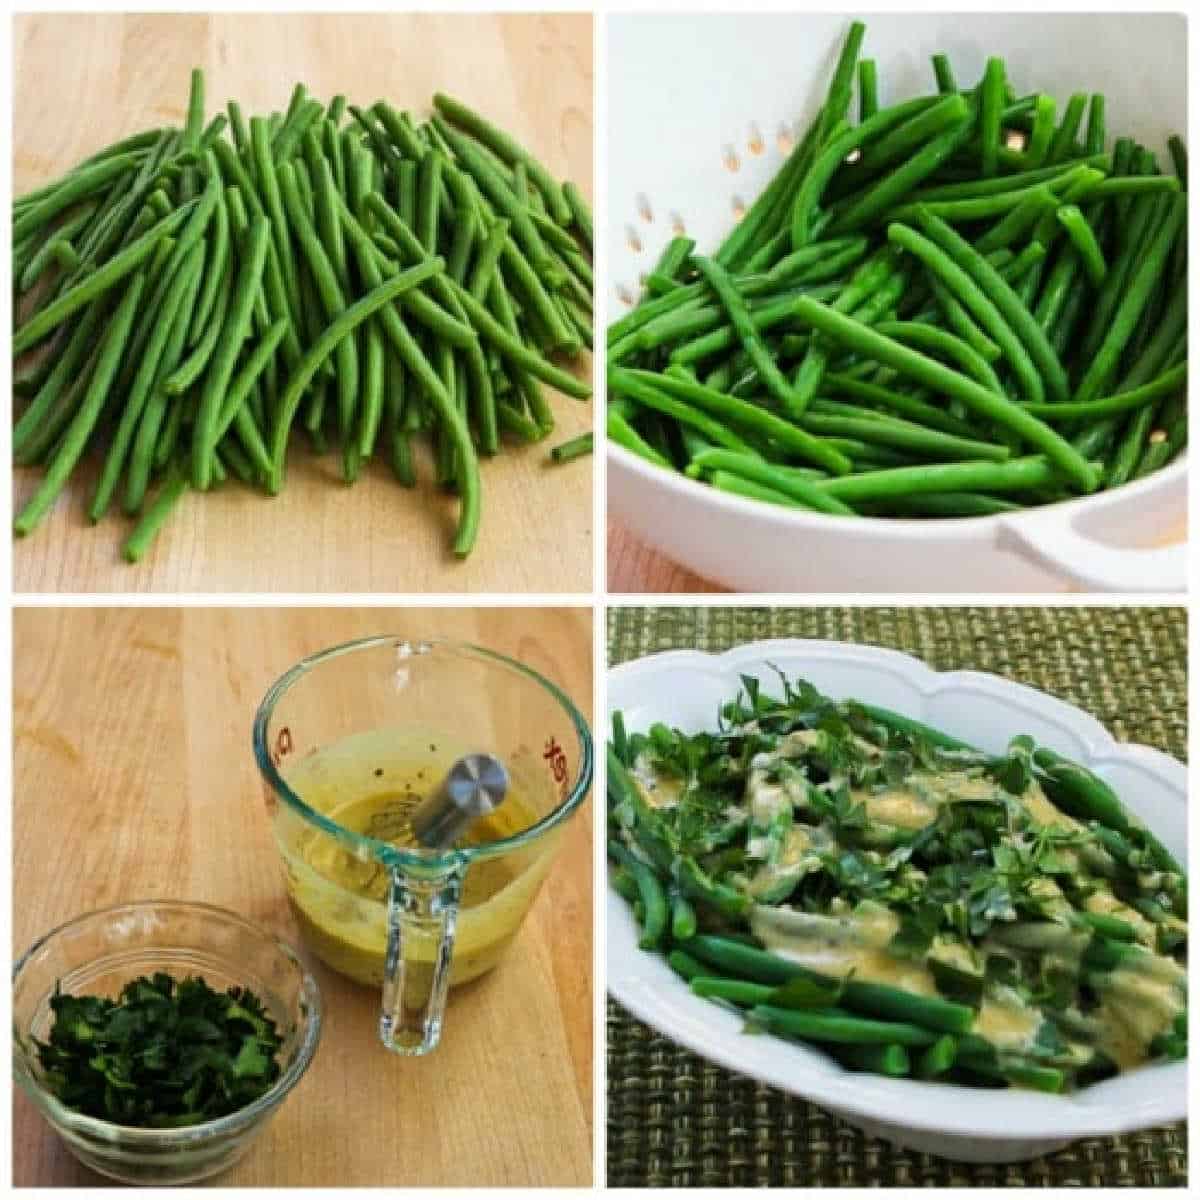 Green beans with tahini and lemon collage from the recipe steps